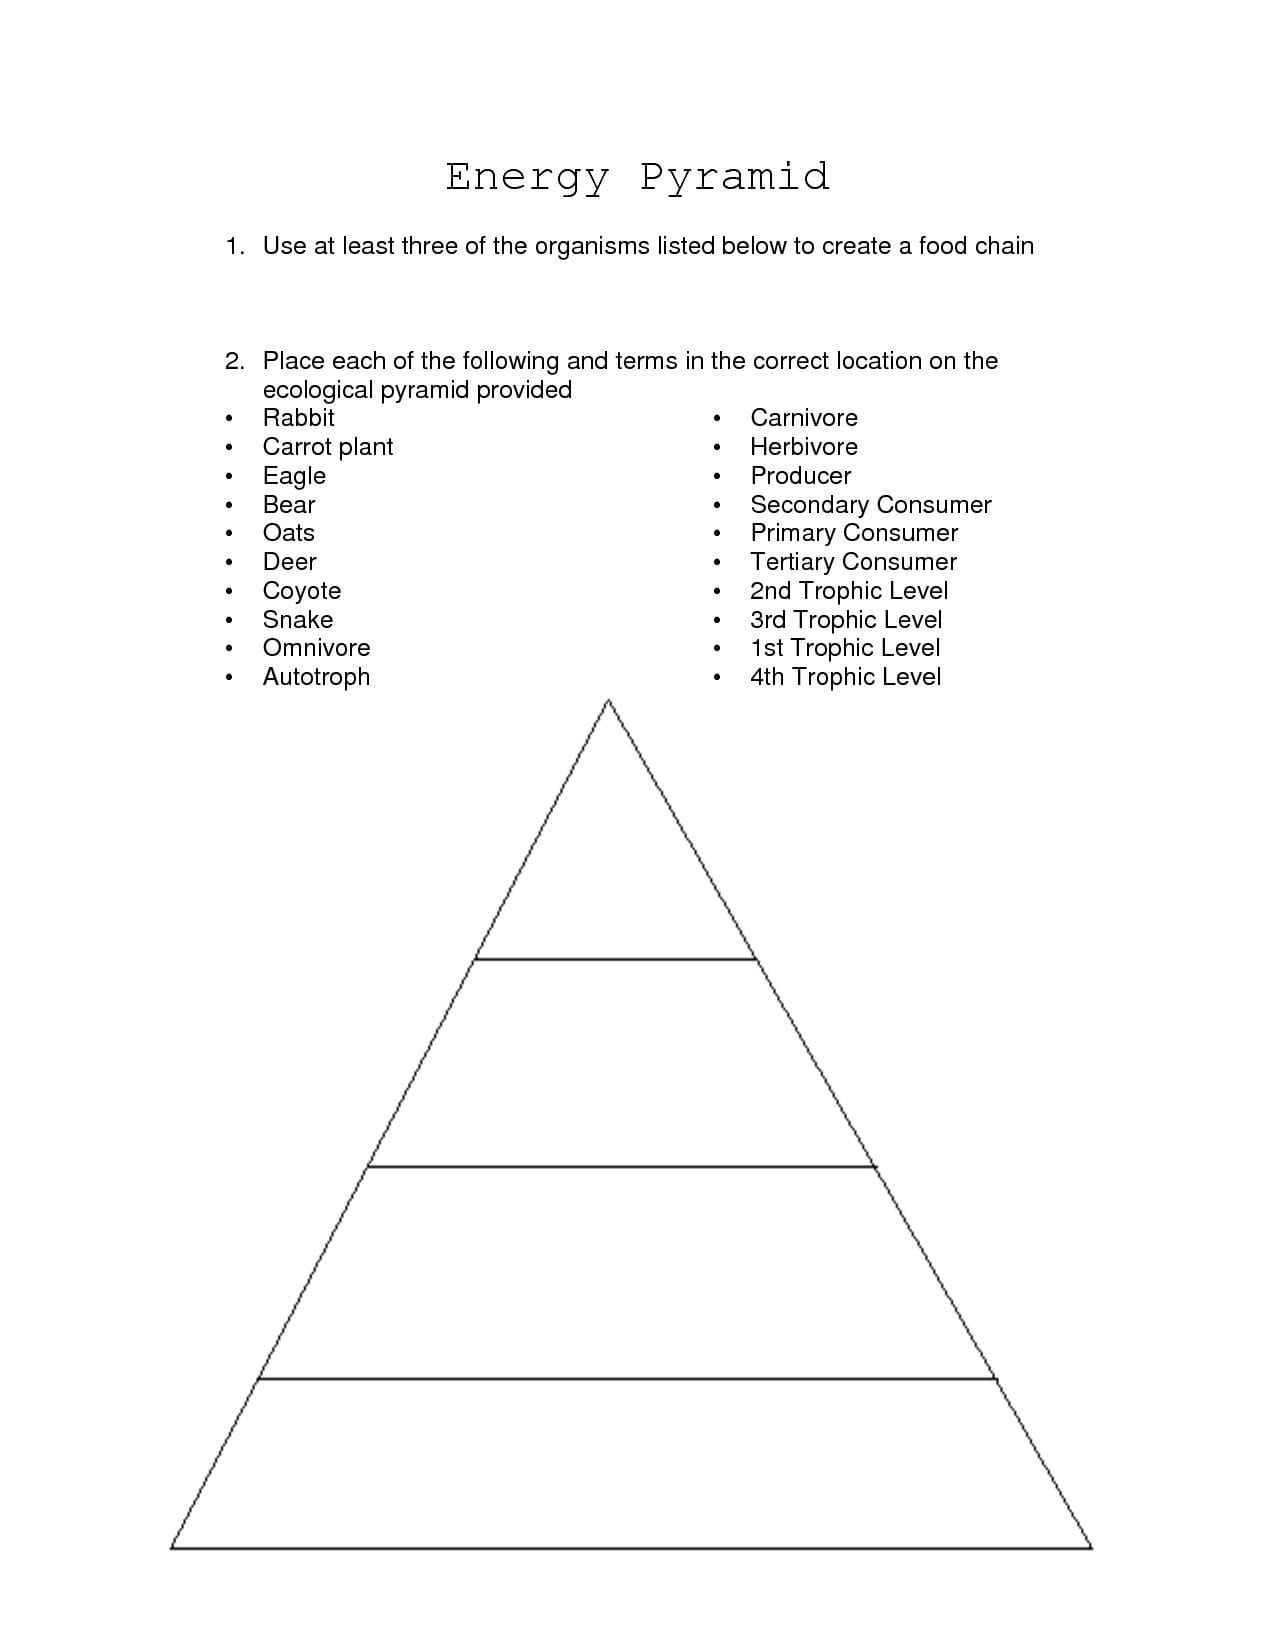 Wolves In Yellowstone Student Worksheet Answers  Briefencounters Also Wolves In Yellowstone Student Worksheet Answers